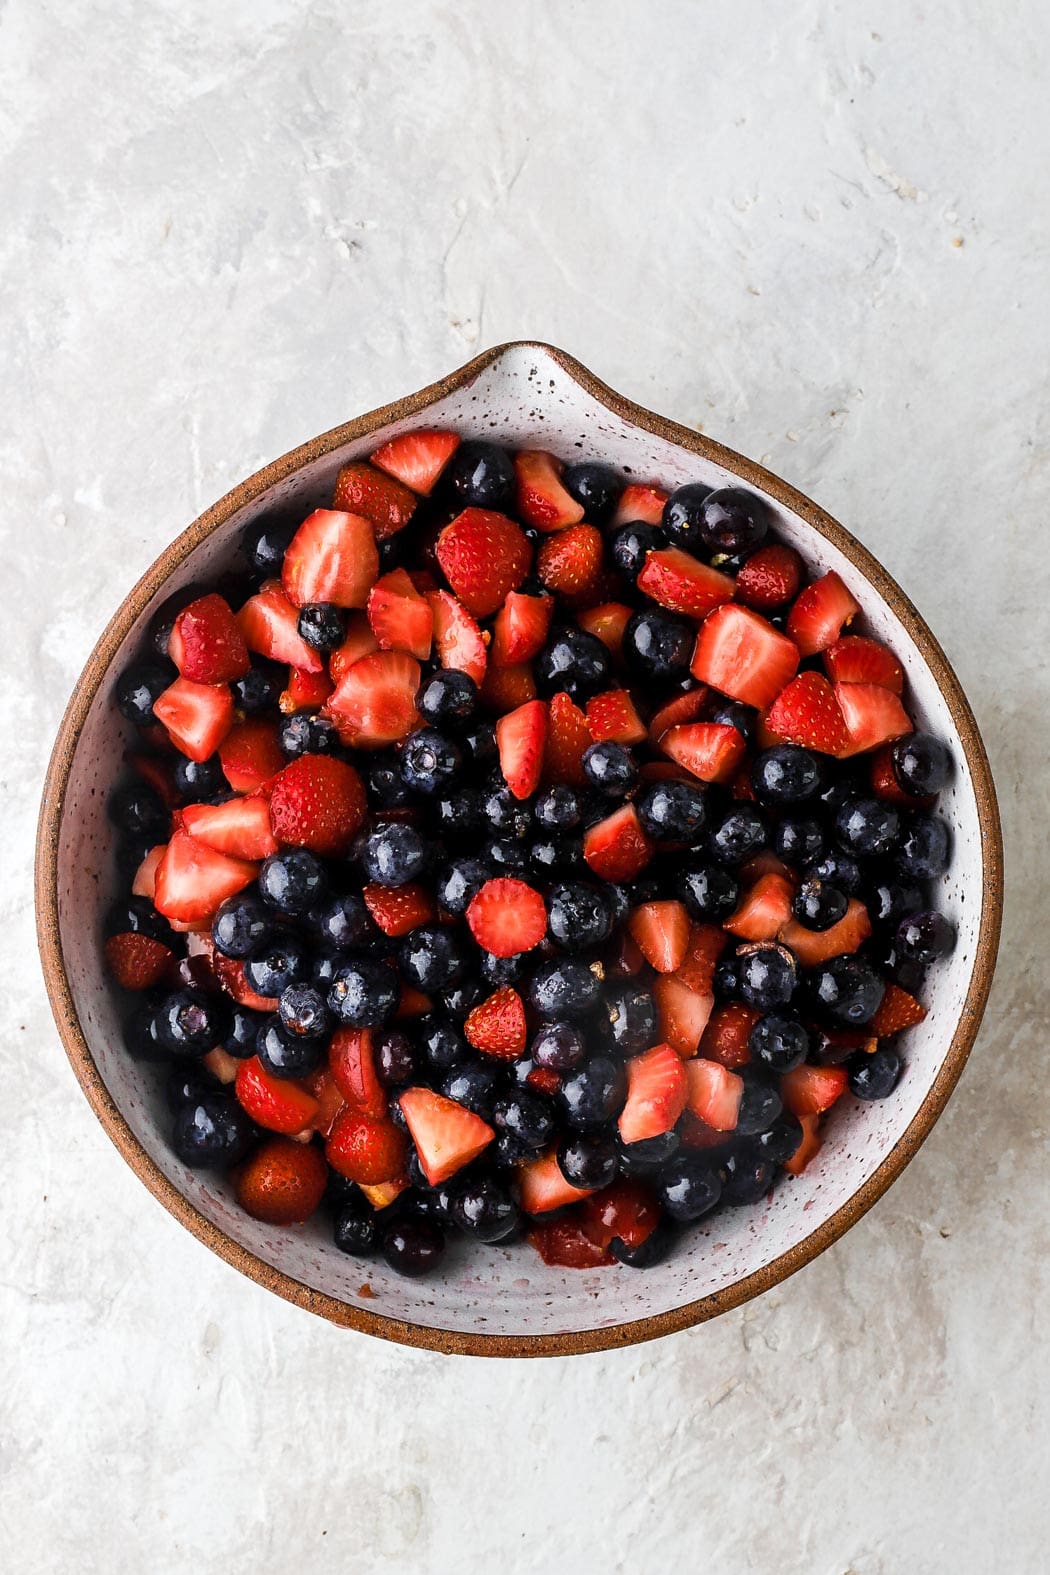 combine the strawberries and blueberries with sugar